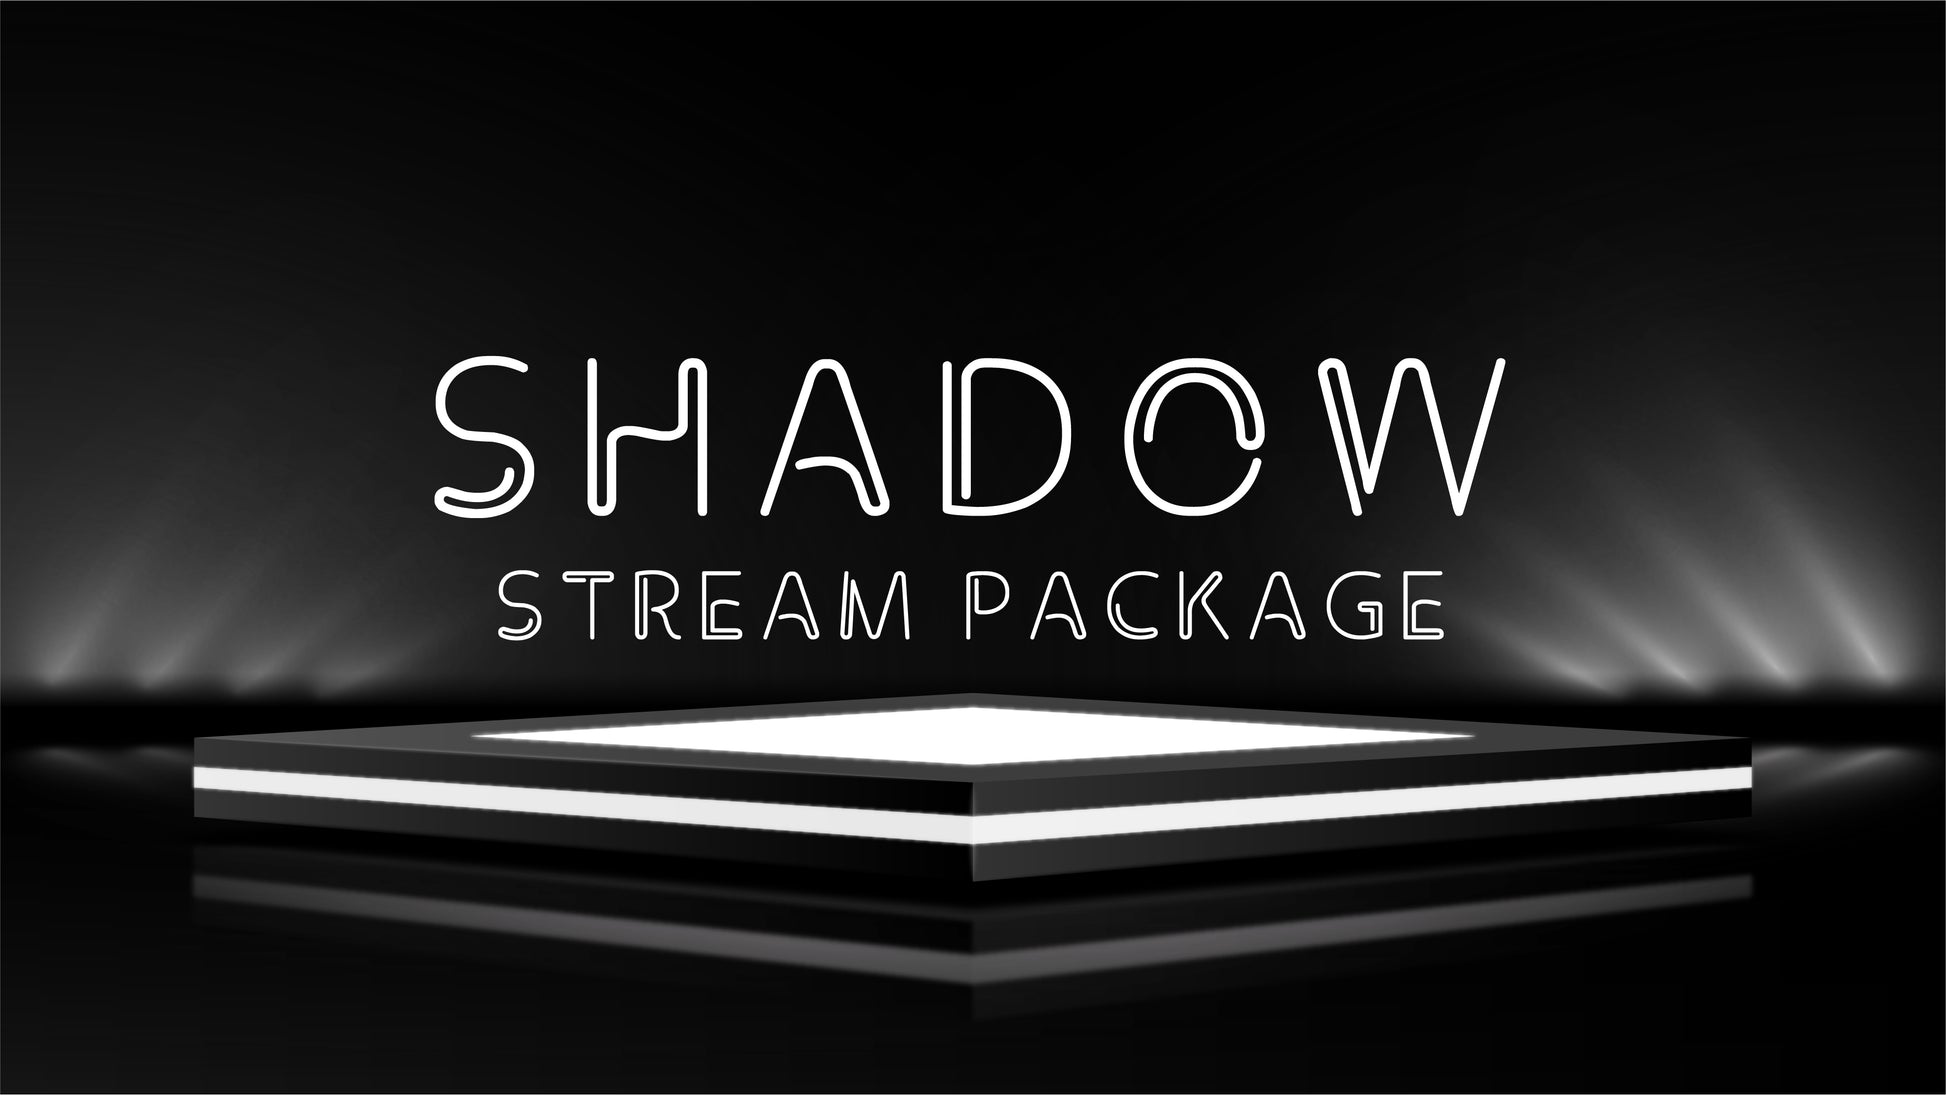 Animated stream overlay package shadow thumbnail stream designz